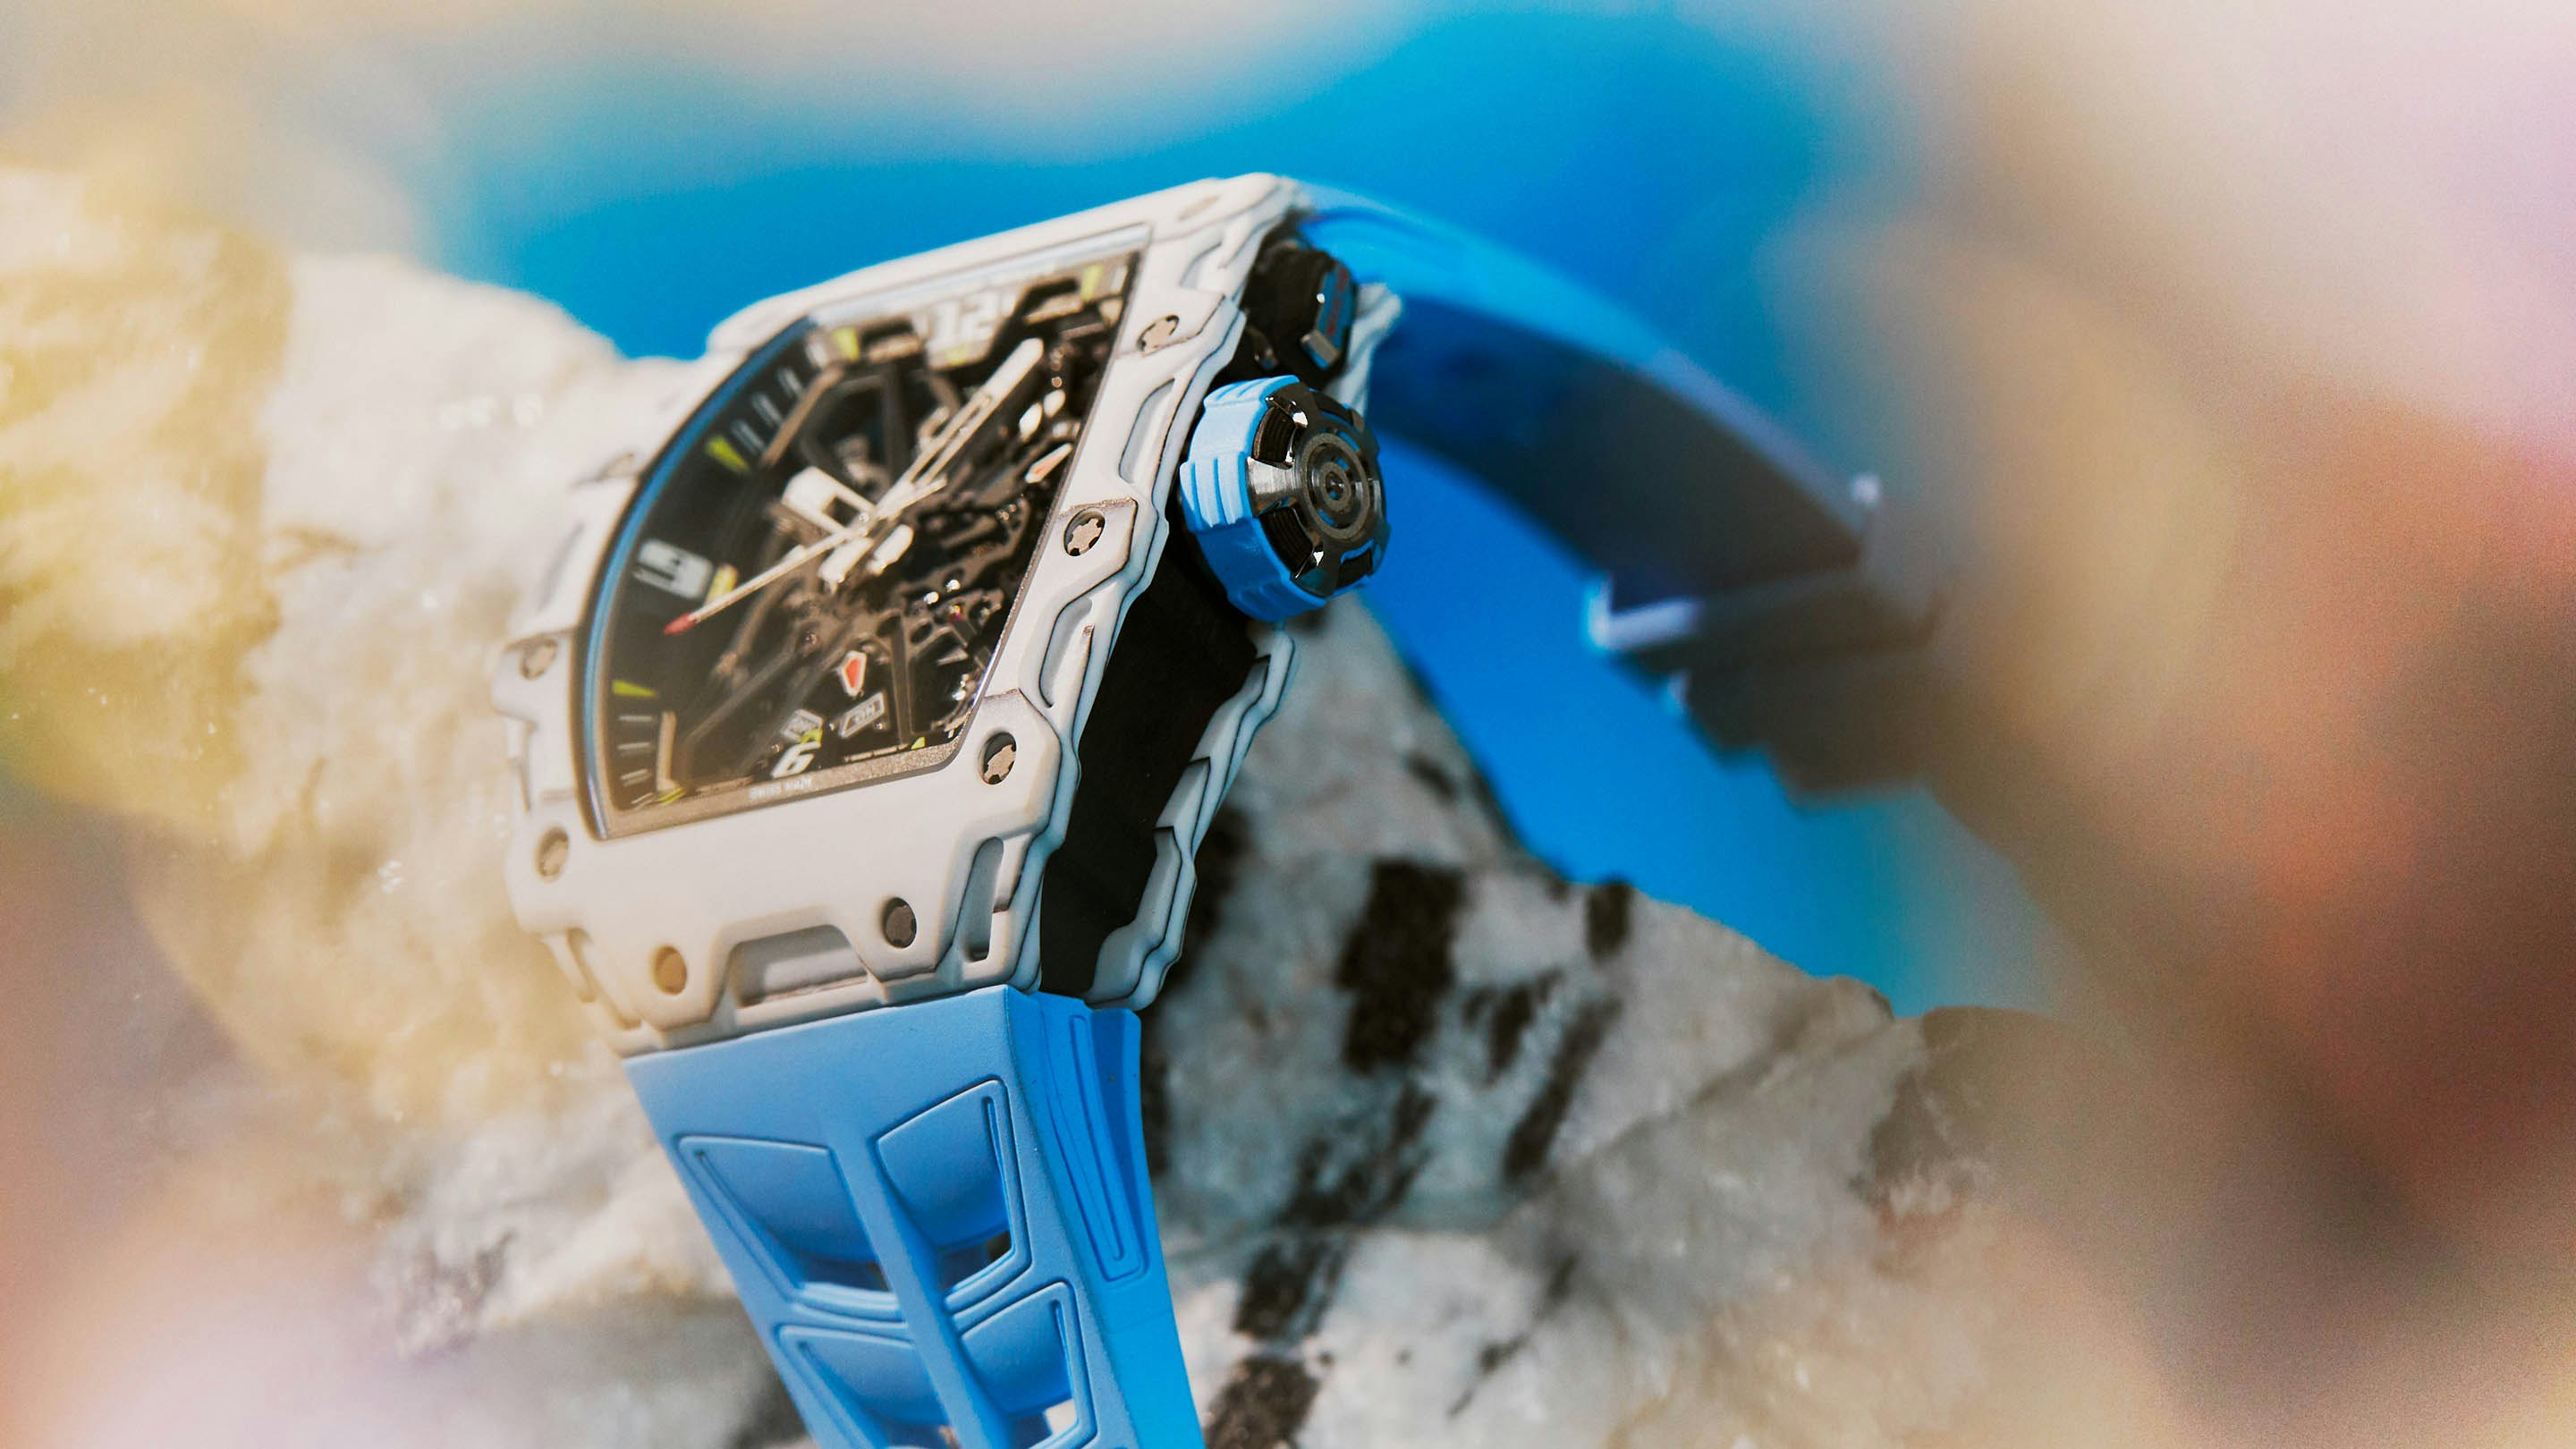 The Richard Mille RM 35-03 with an automatic winding rotor featuring user-adjustable geometry